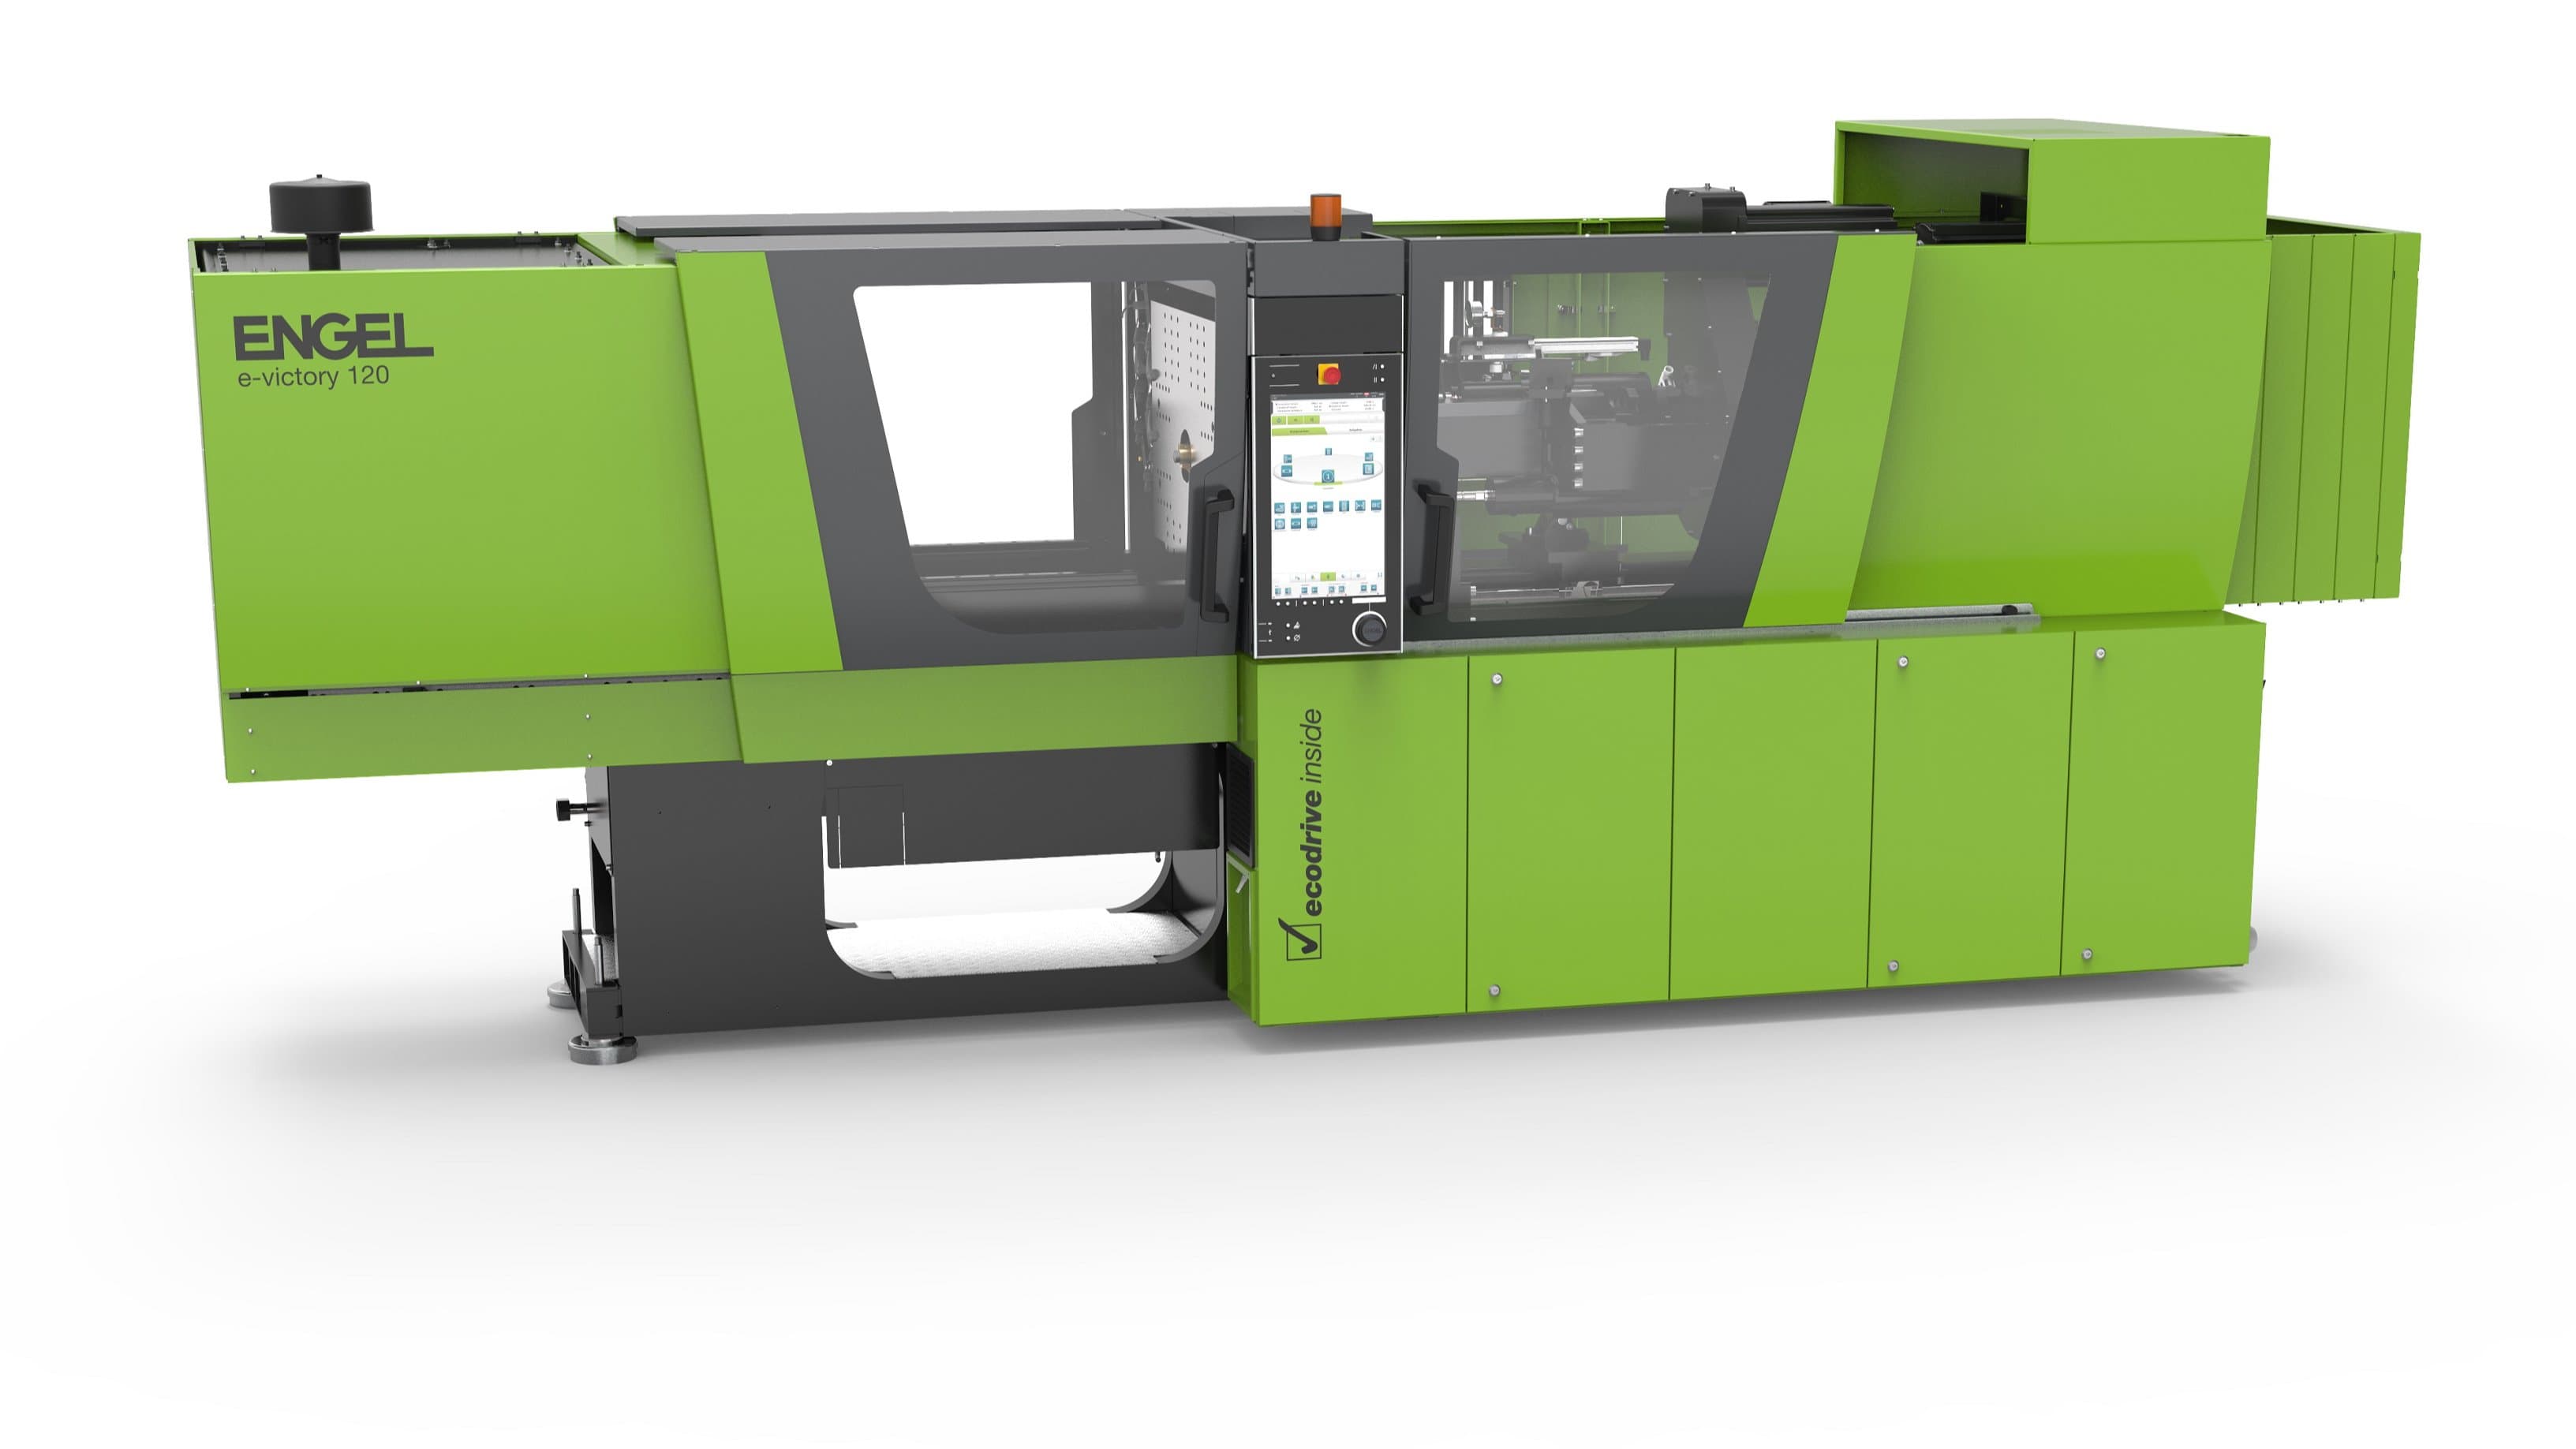 The tie-bar-less injection moulding machine with precise servo-electric injection unit.